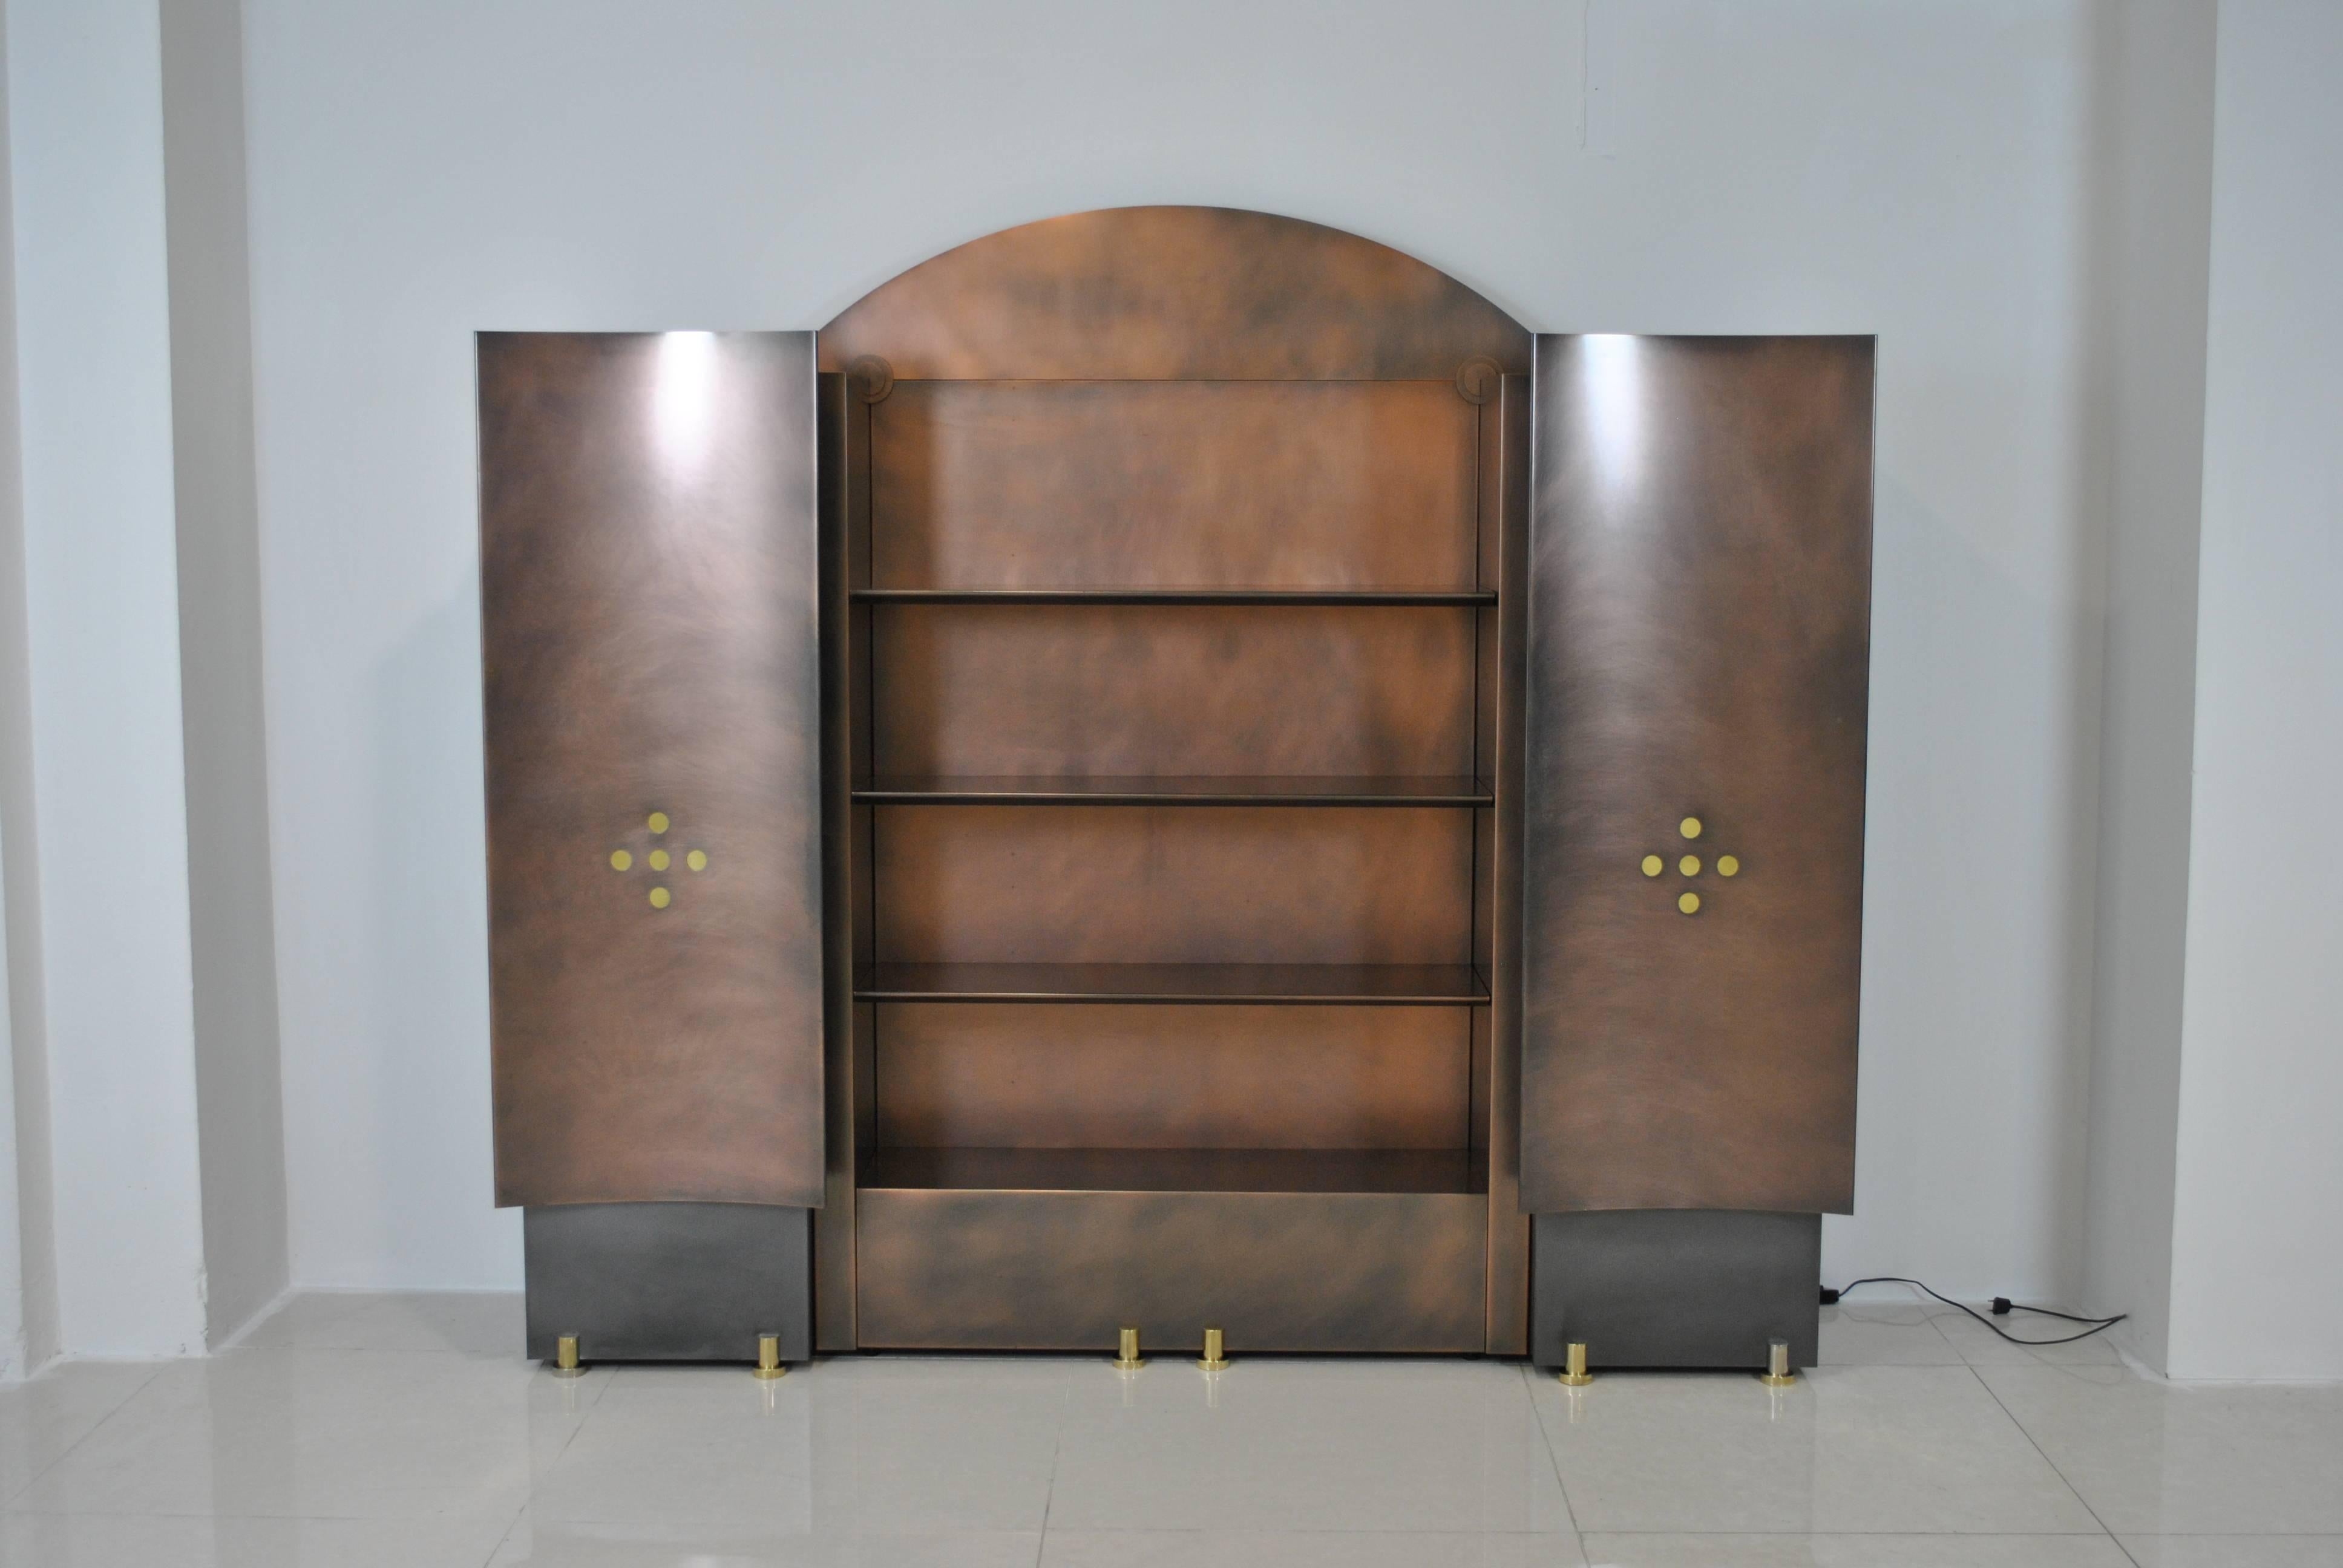 Patinated Neoclassical Steel and Brass Wall Unit by Belgochrom, Belgium, 1980s For Sale